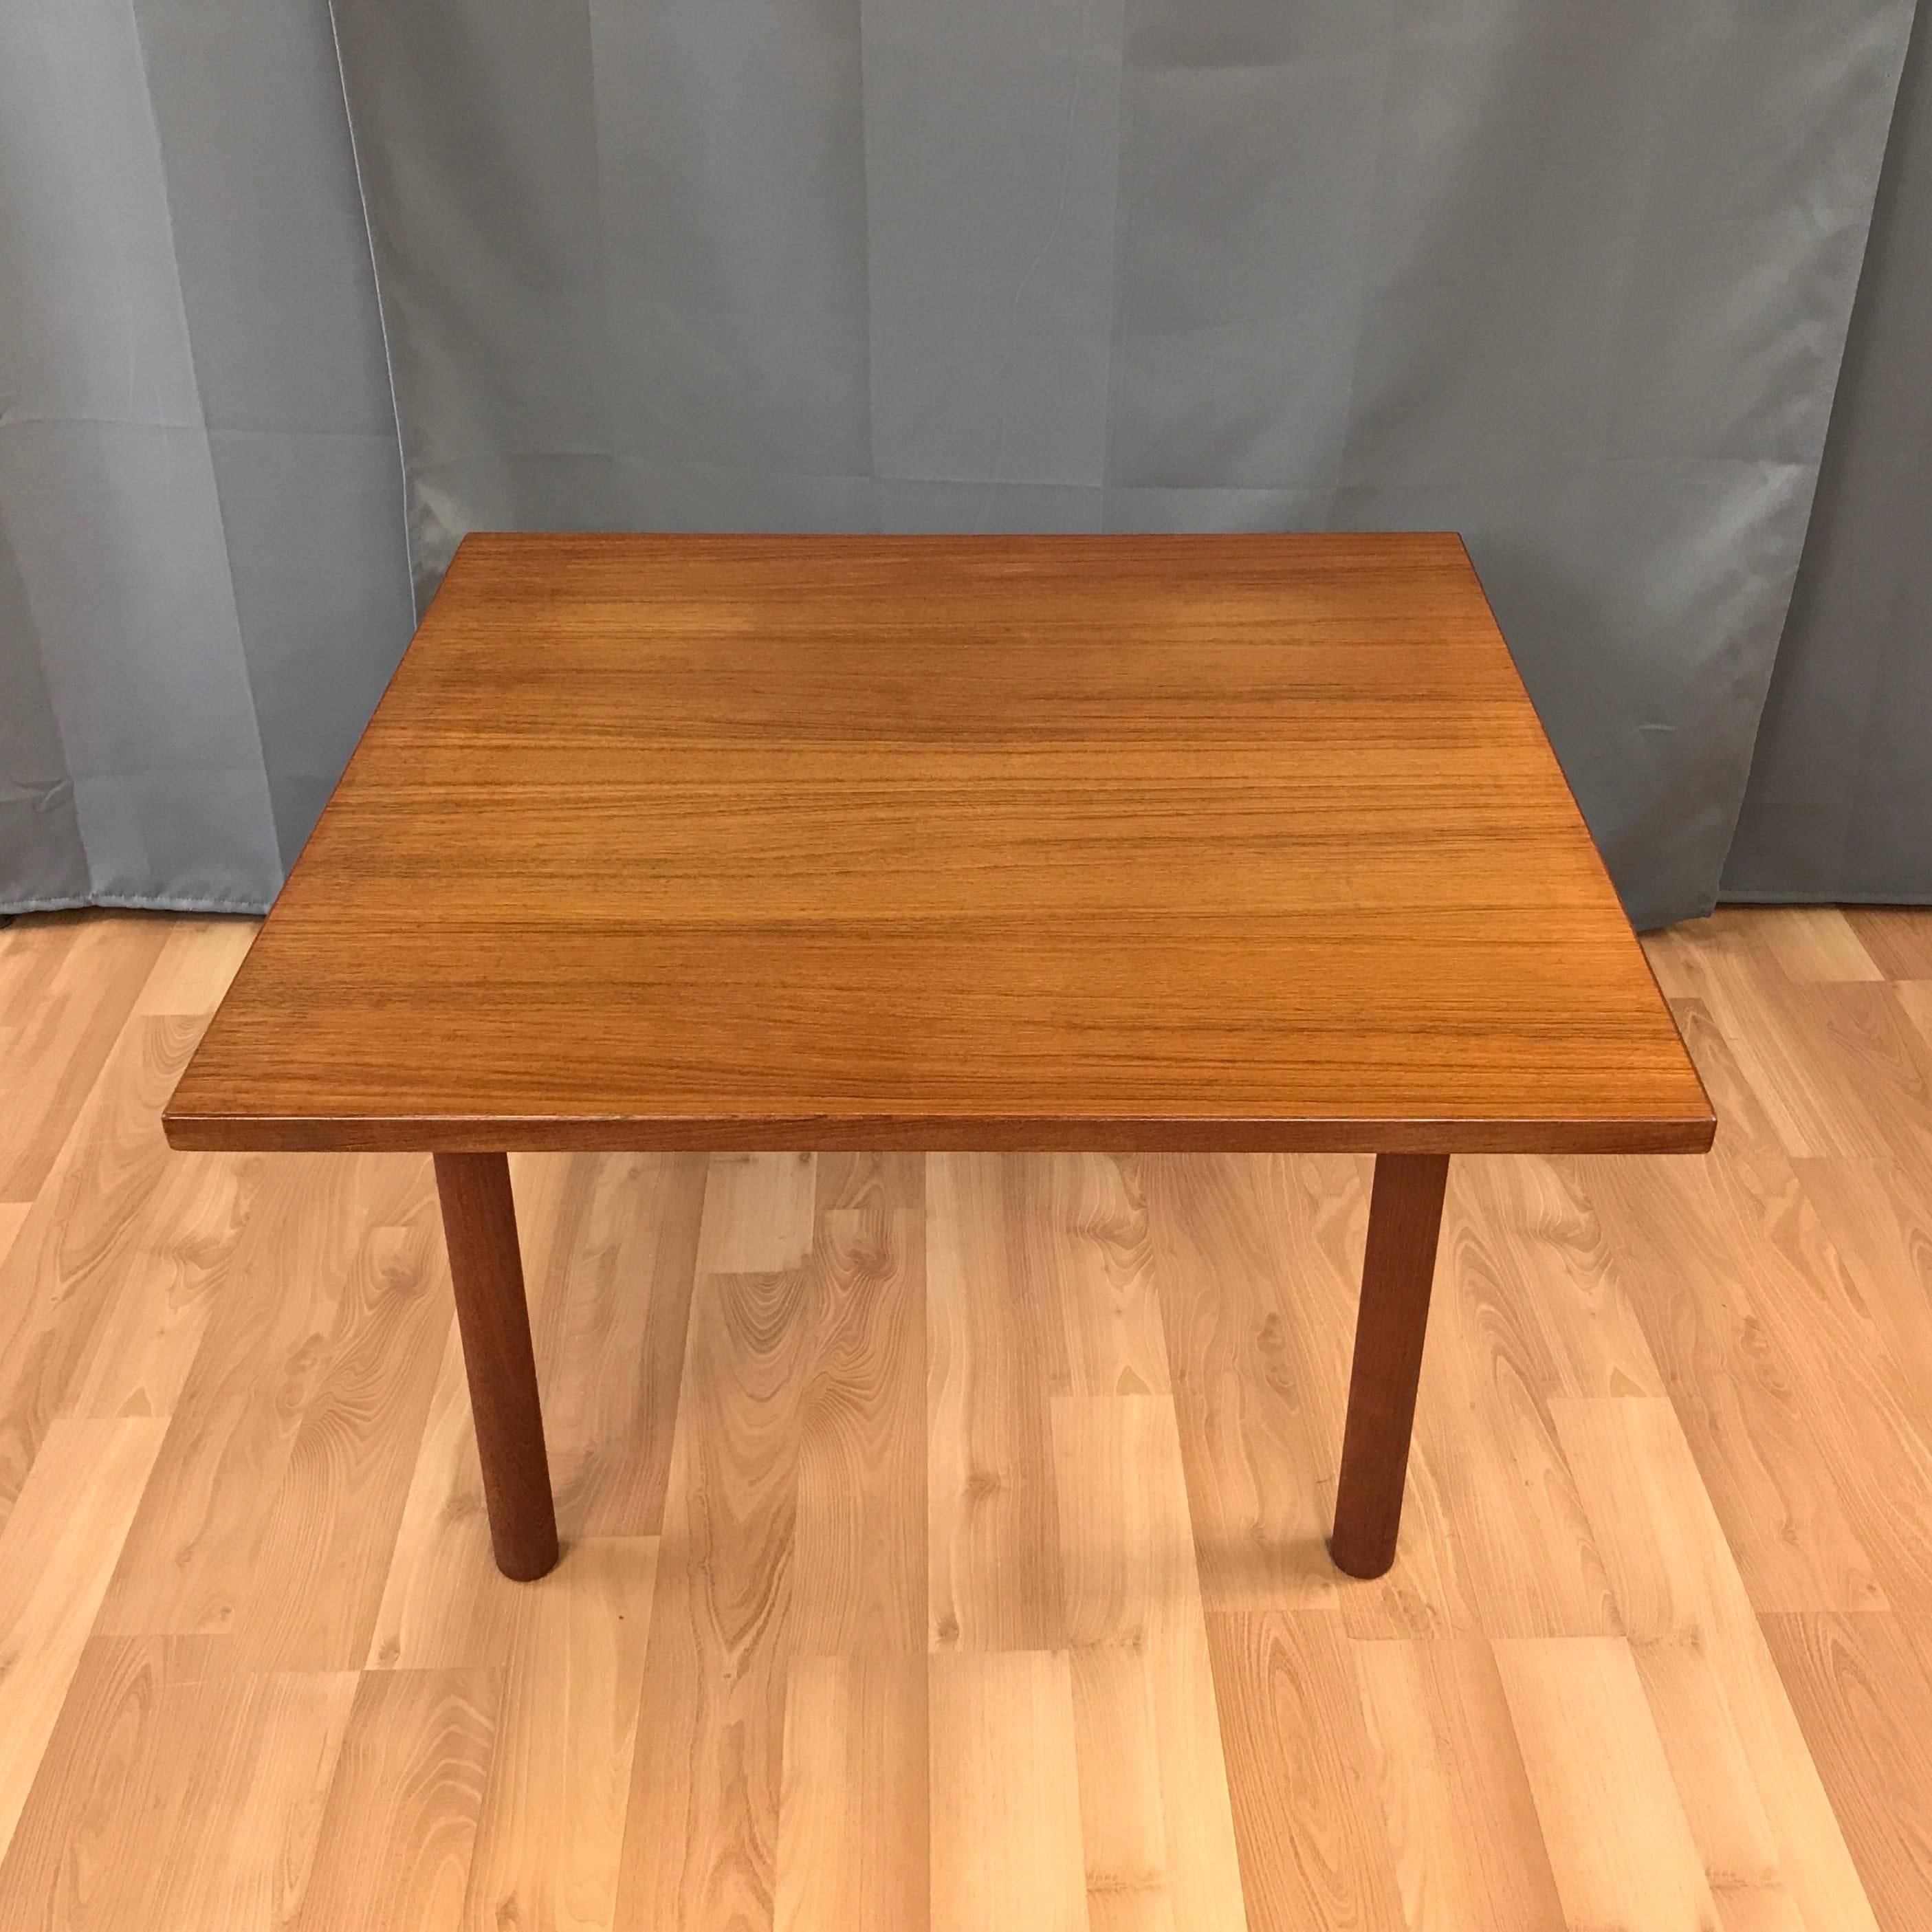 An uncommon Danish modern teak cocktail or coffee table by Hans J. Wegner for GETAMA.

Spacious teak veneer square top is supported by sturdy solid teak flared dowel legs. A pure and timeless design well-suited for both midcentury and modern